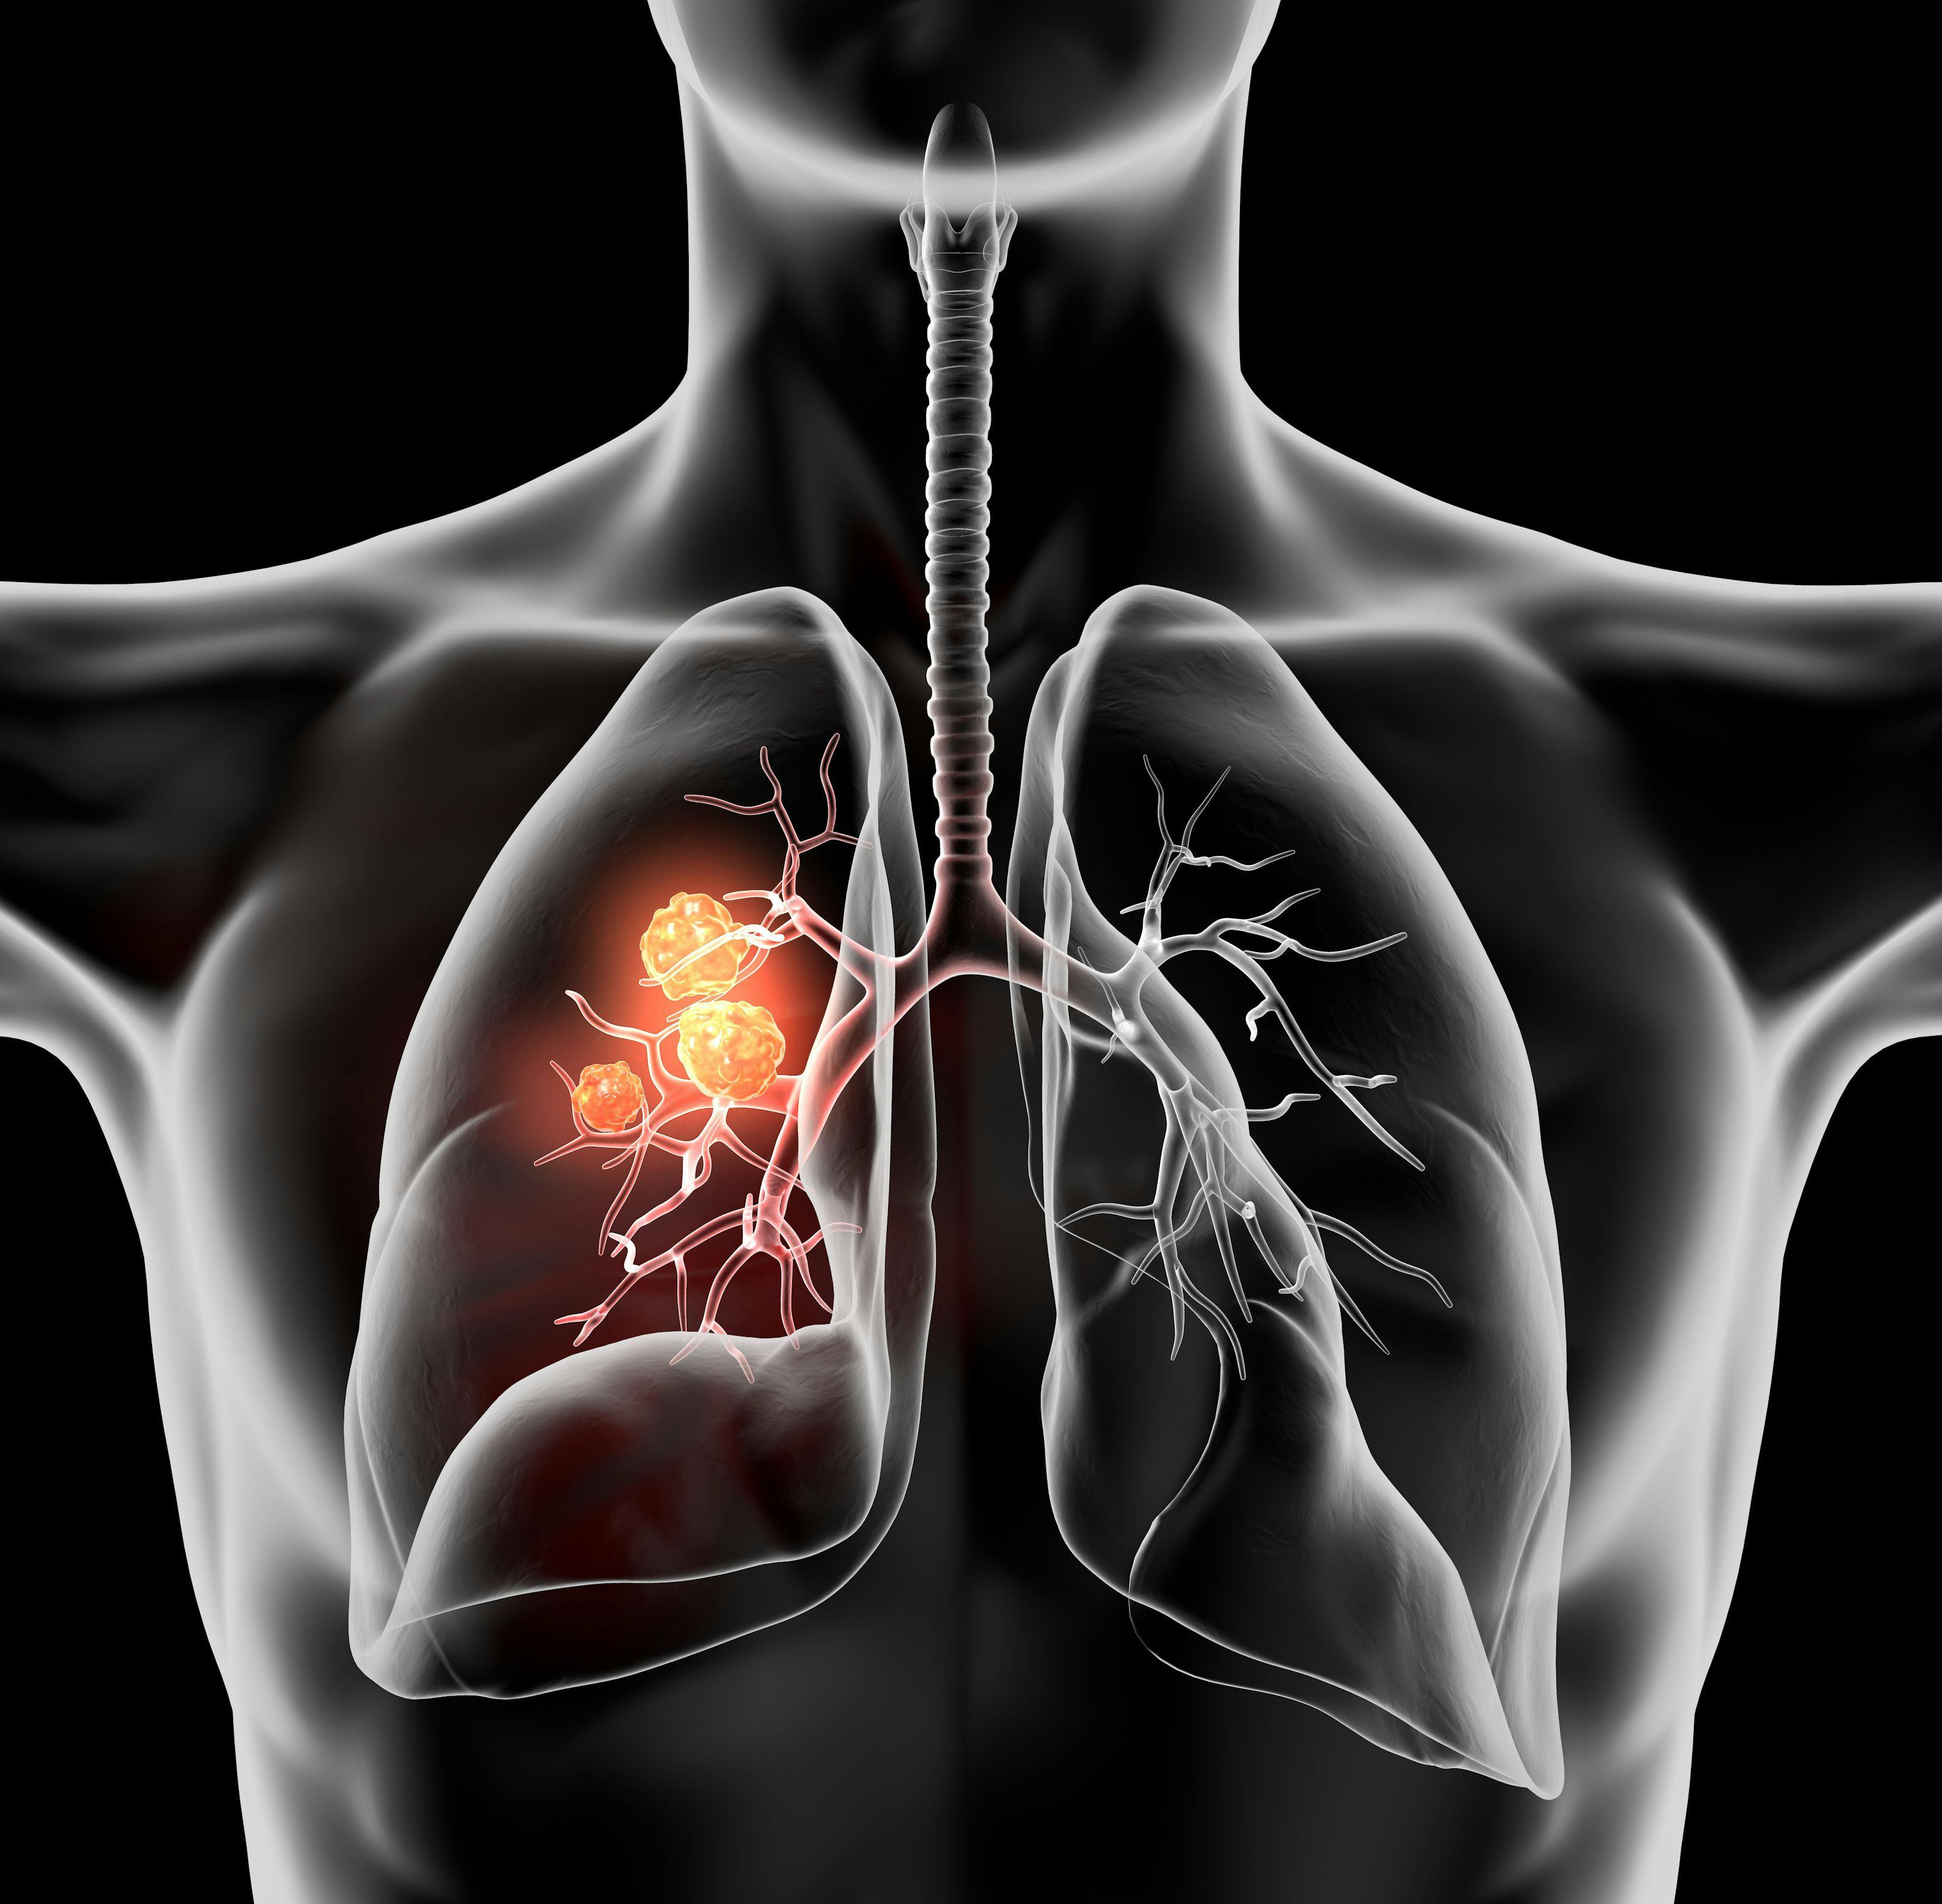 Positive Oncological Outcomes Found for Stage I NSCLC With Shorter Time to Surgery